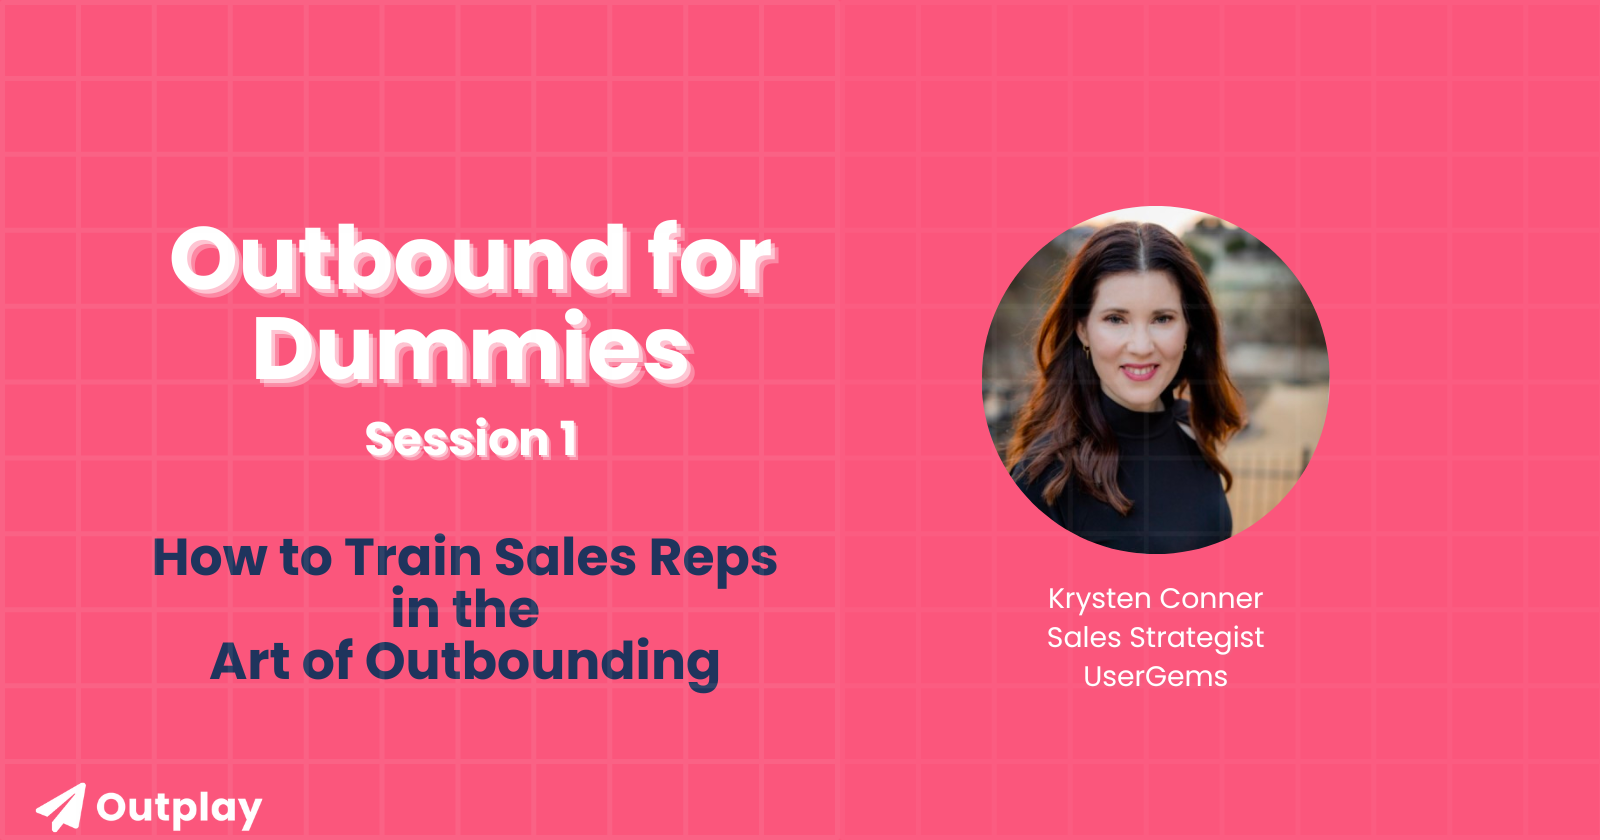 Training reps in outbound sales